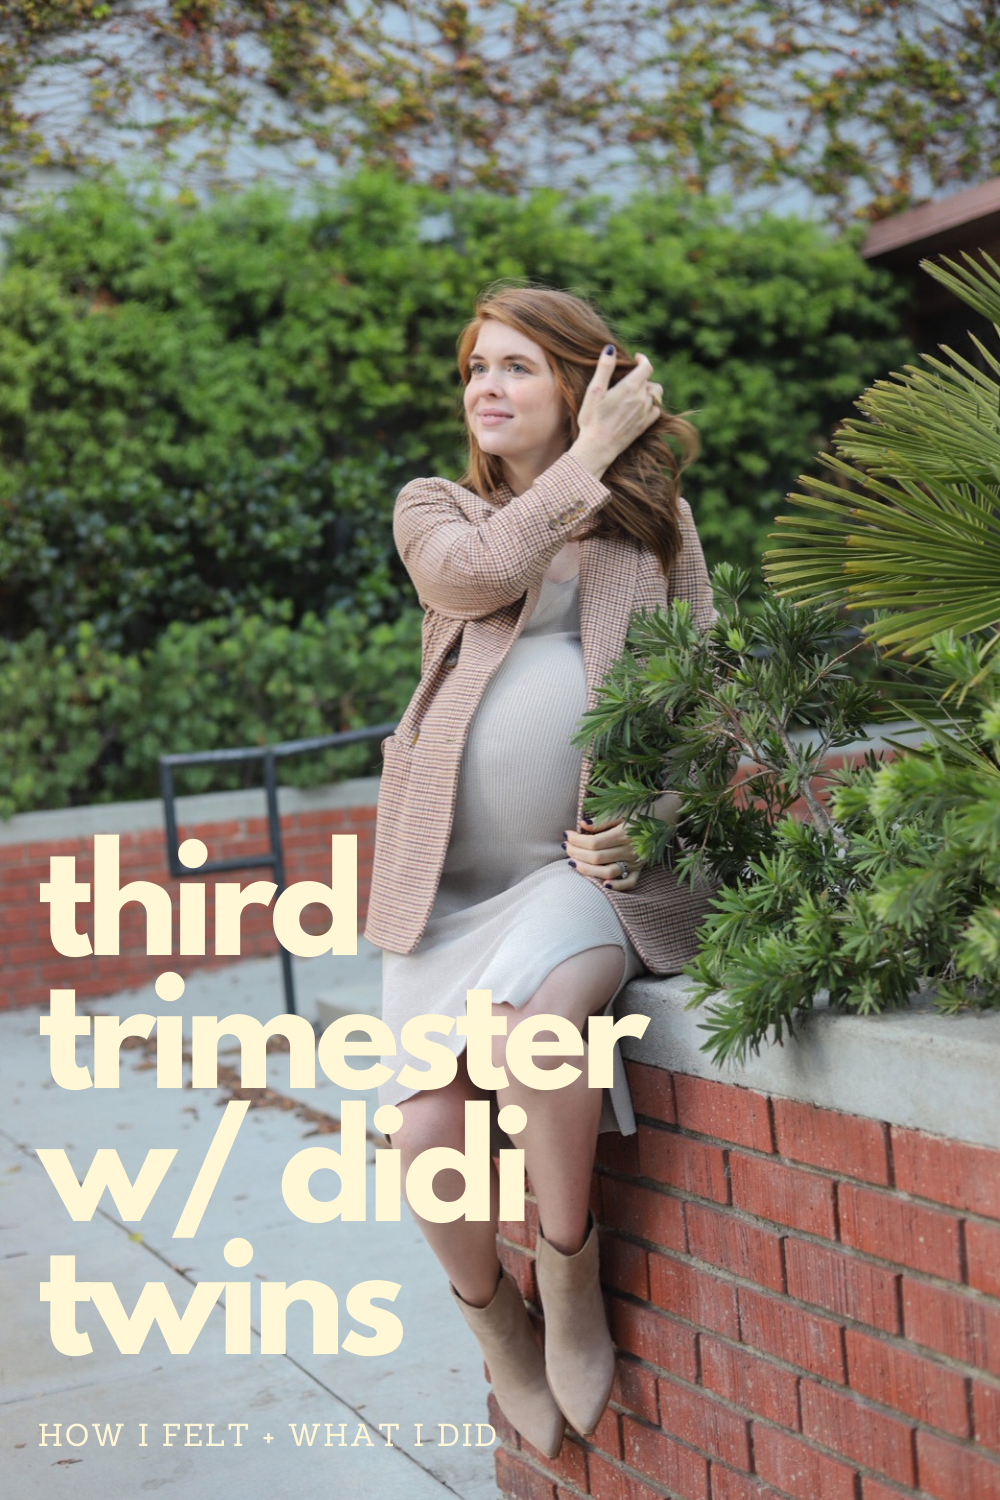 lments of style, third trimester with twins, didi twins, boy girl twins, twin pregnancy symptoms and side effects, la blogger, fall maternity pregnant style